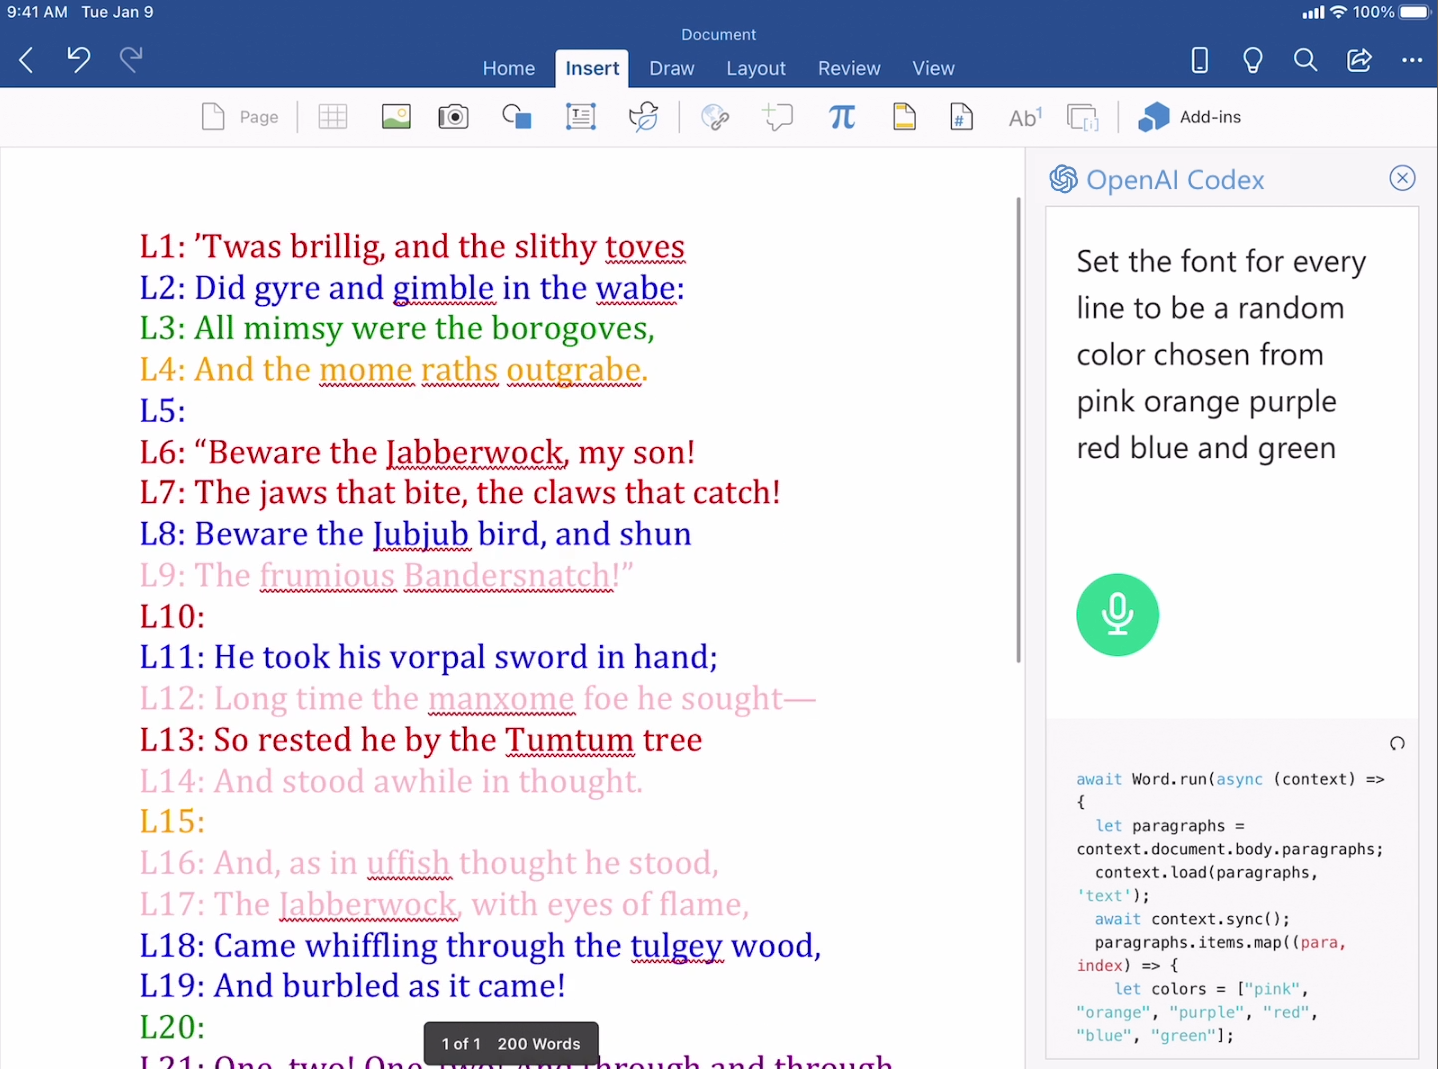 OpenAI's Codex AI modifies a Word document according to simple instructions.